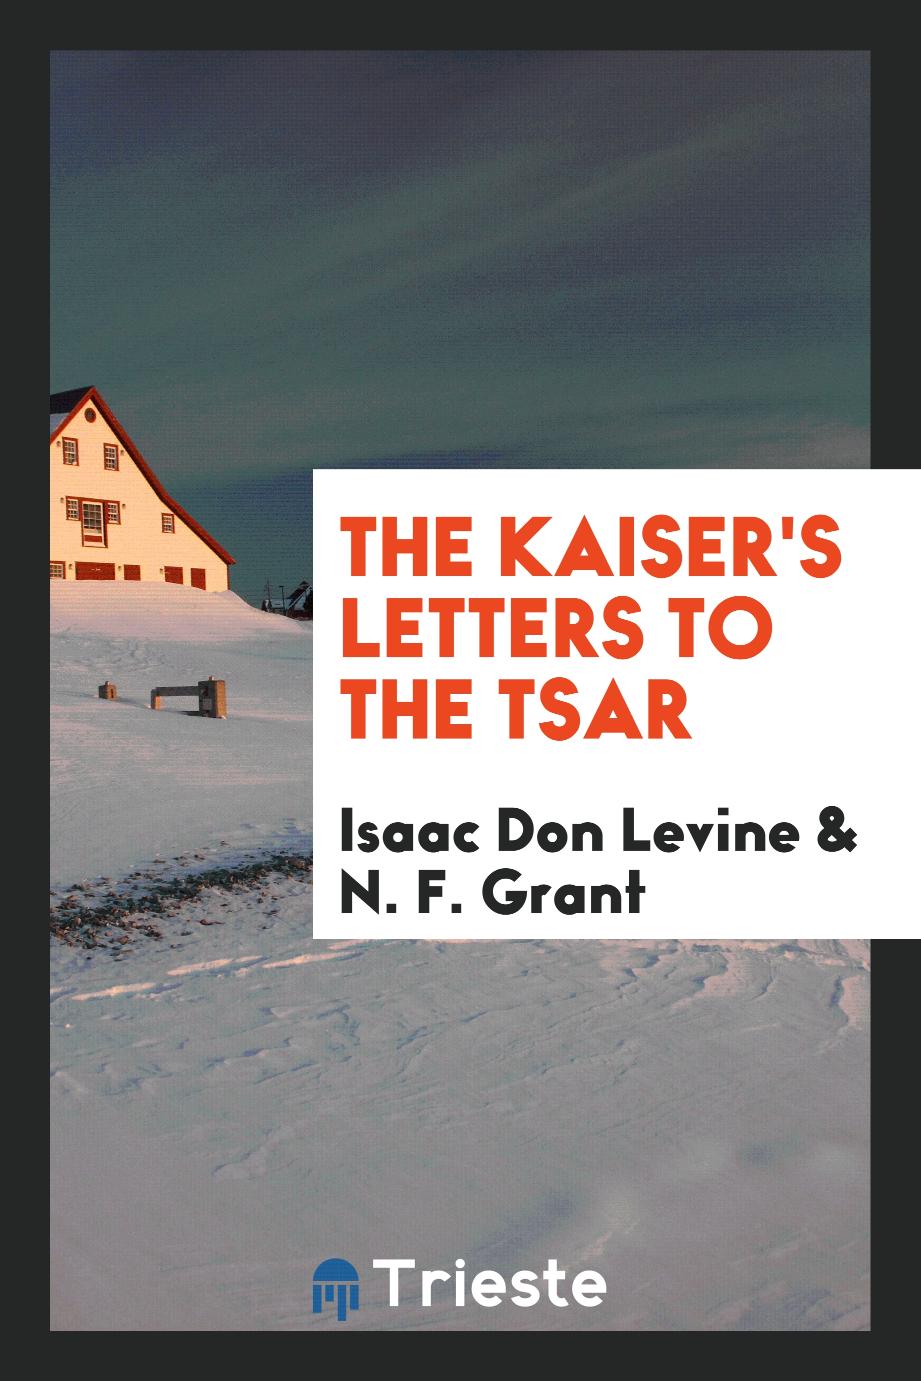 The Kaiser's letters to the Tsar